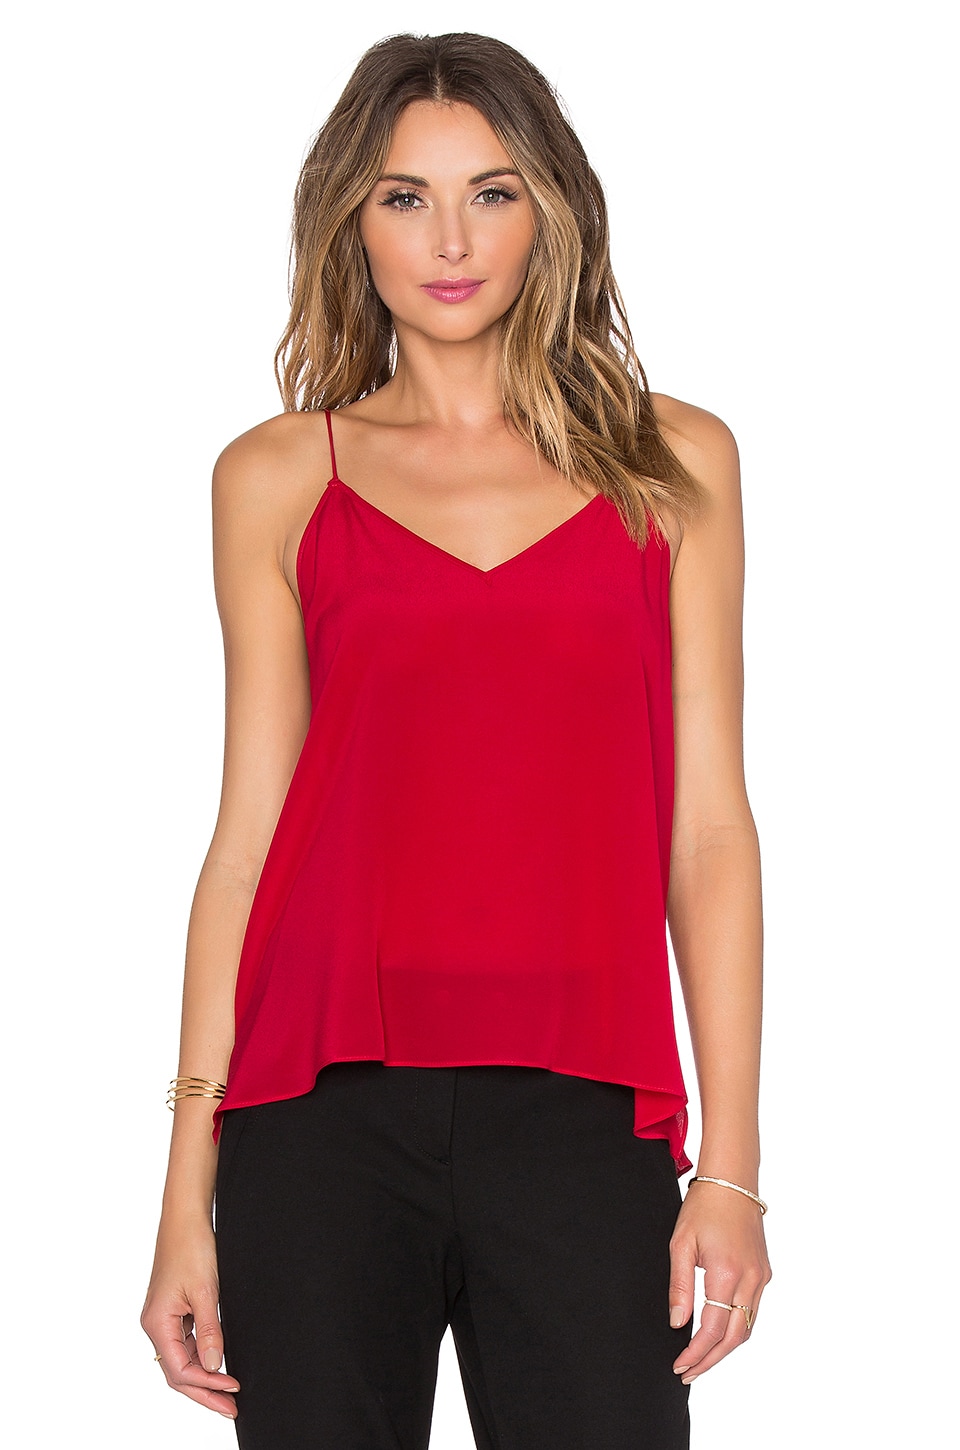 CAMI NYC The Sydney Tank in Red | REVOLVE